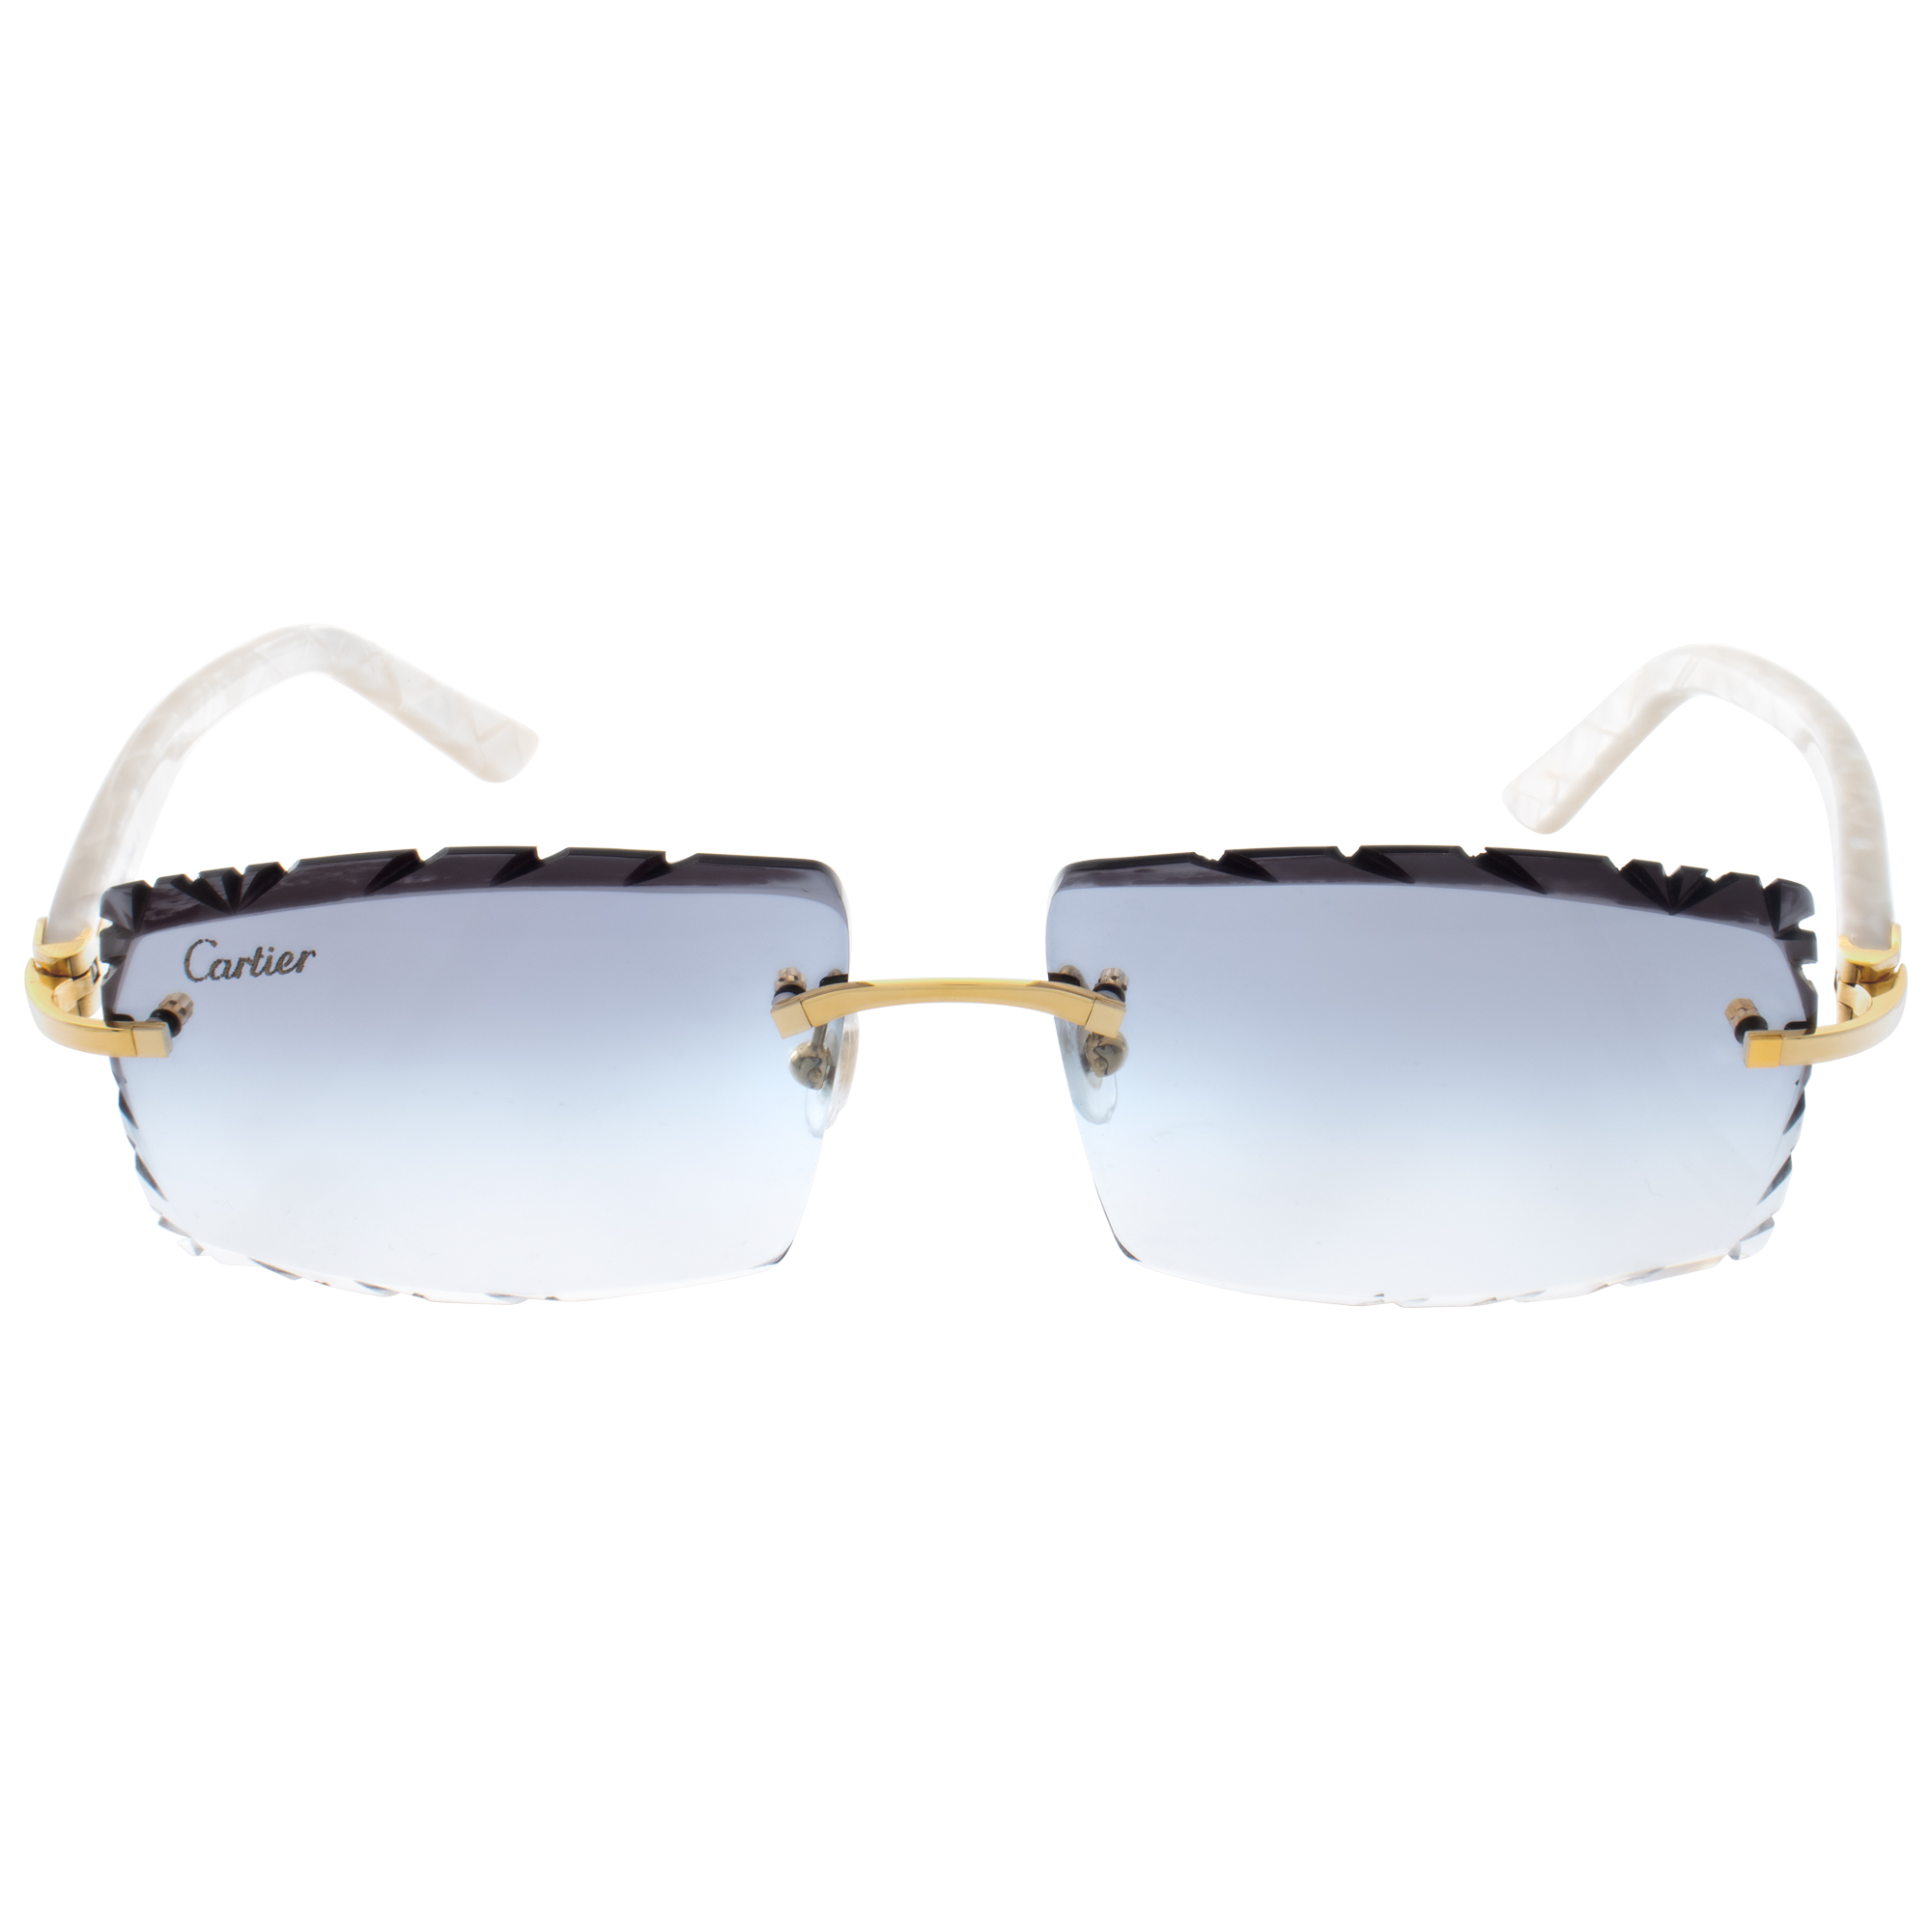 Cartier Pearl White Rimless Eyeglasses converted into sunglasses with beveled blue lens image 1